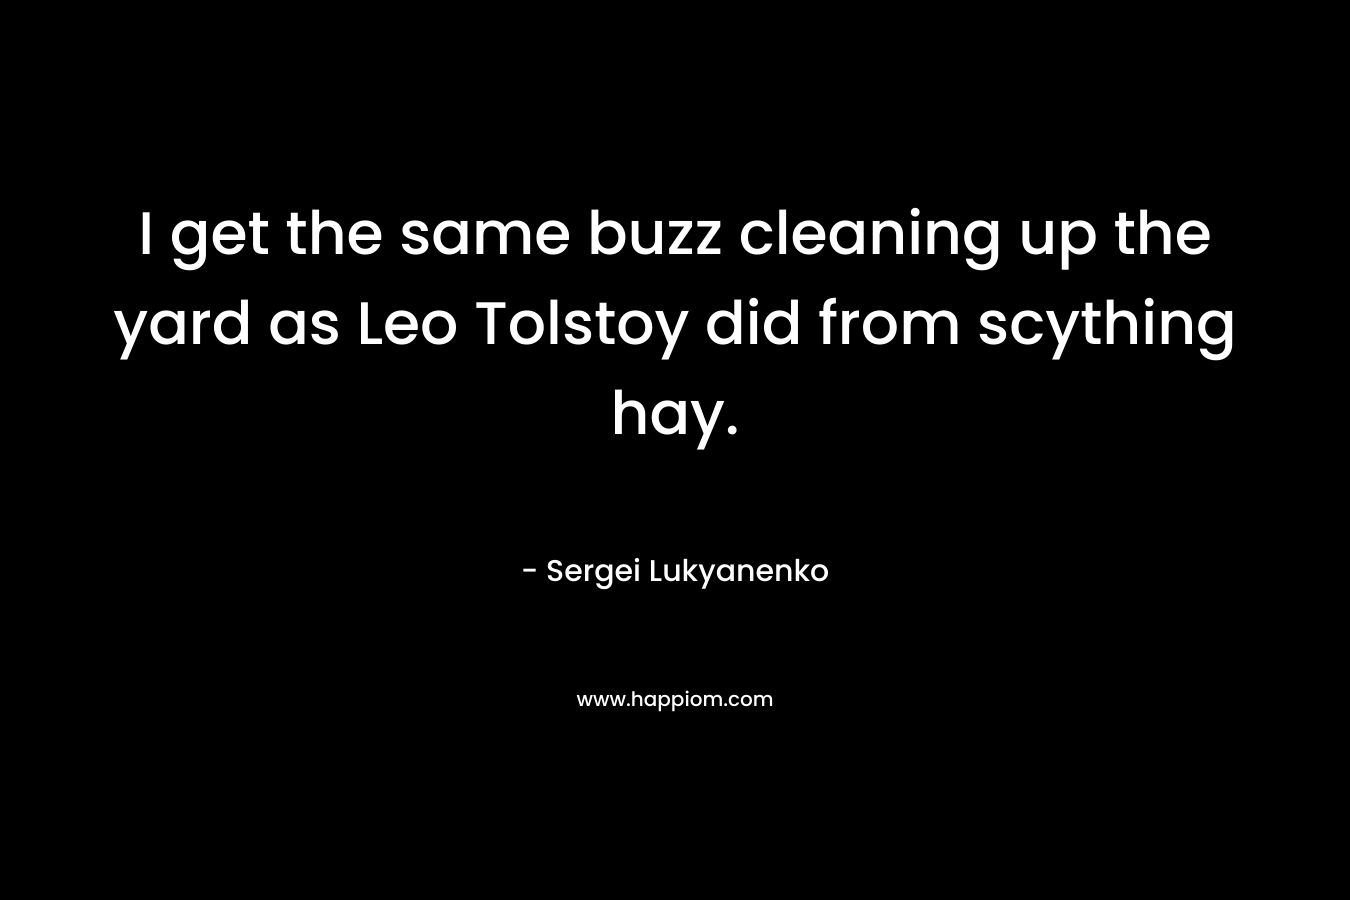 I get the same buzz cleaning up the yard as Leo Tolstoy did from scything hay.